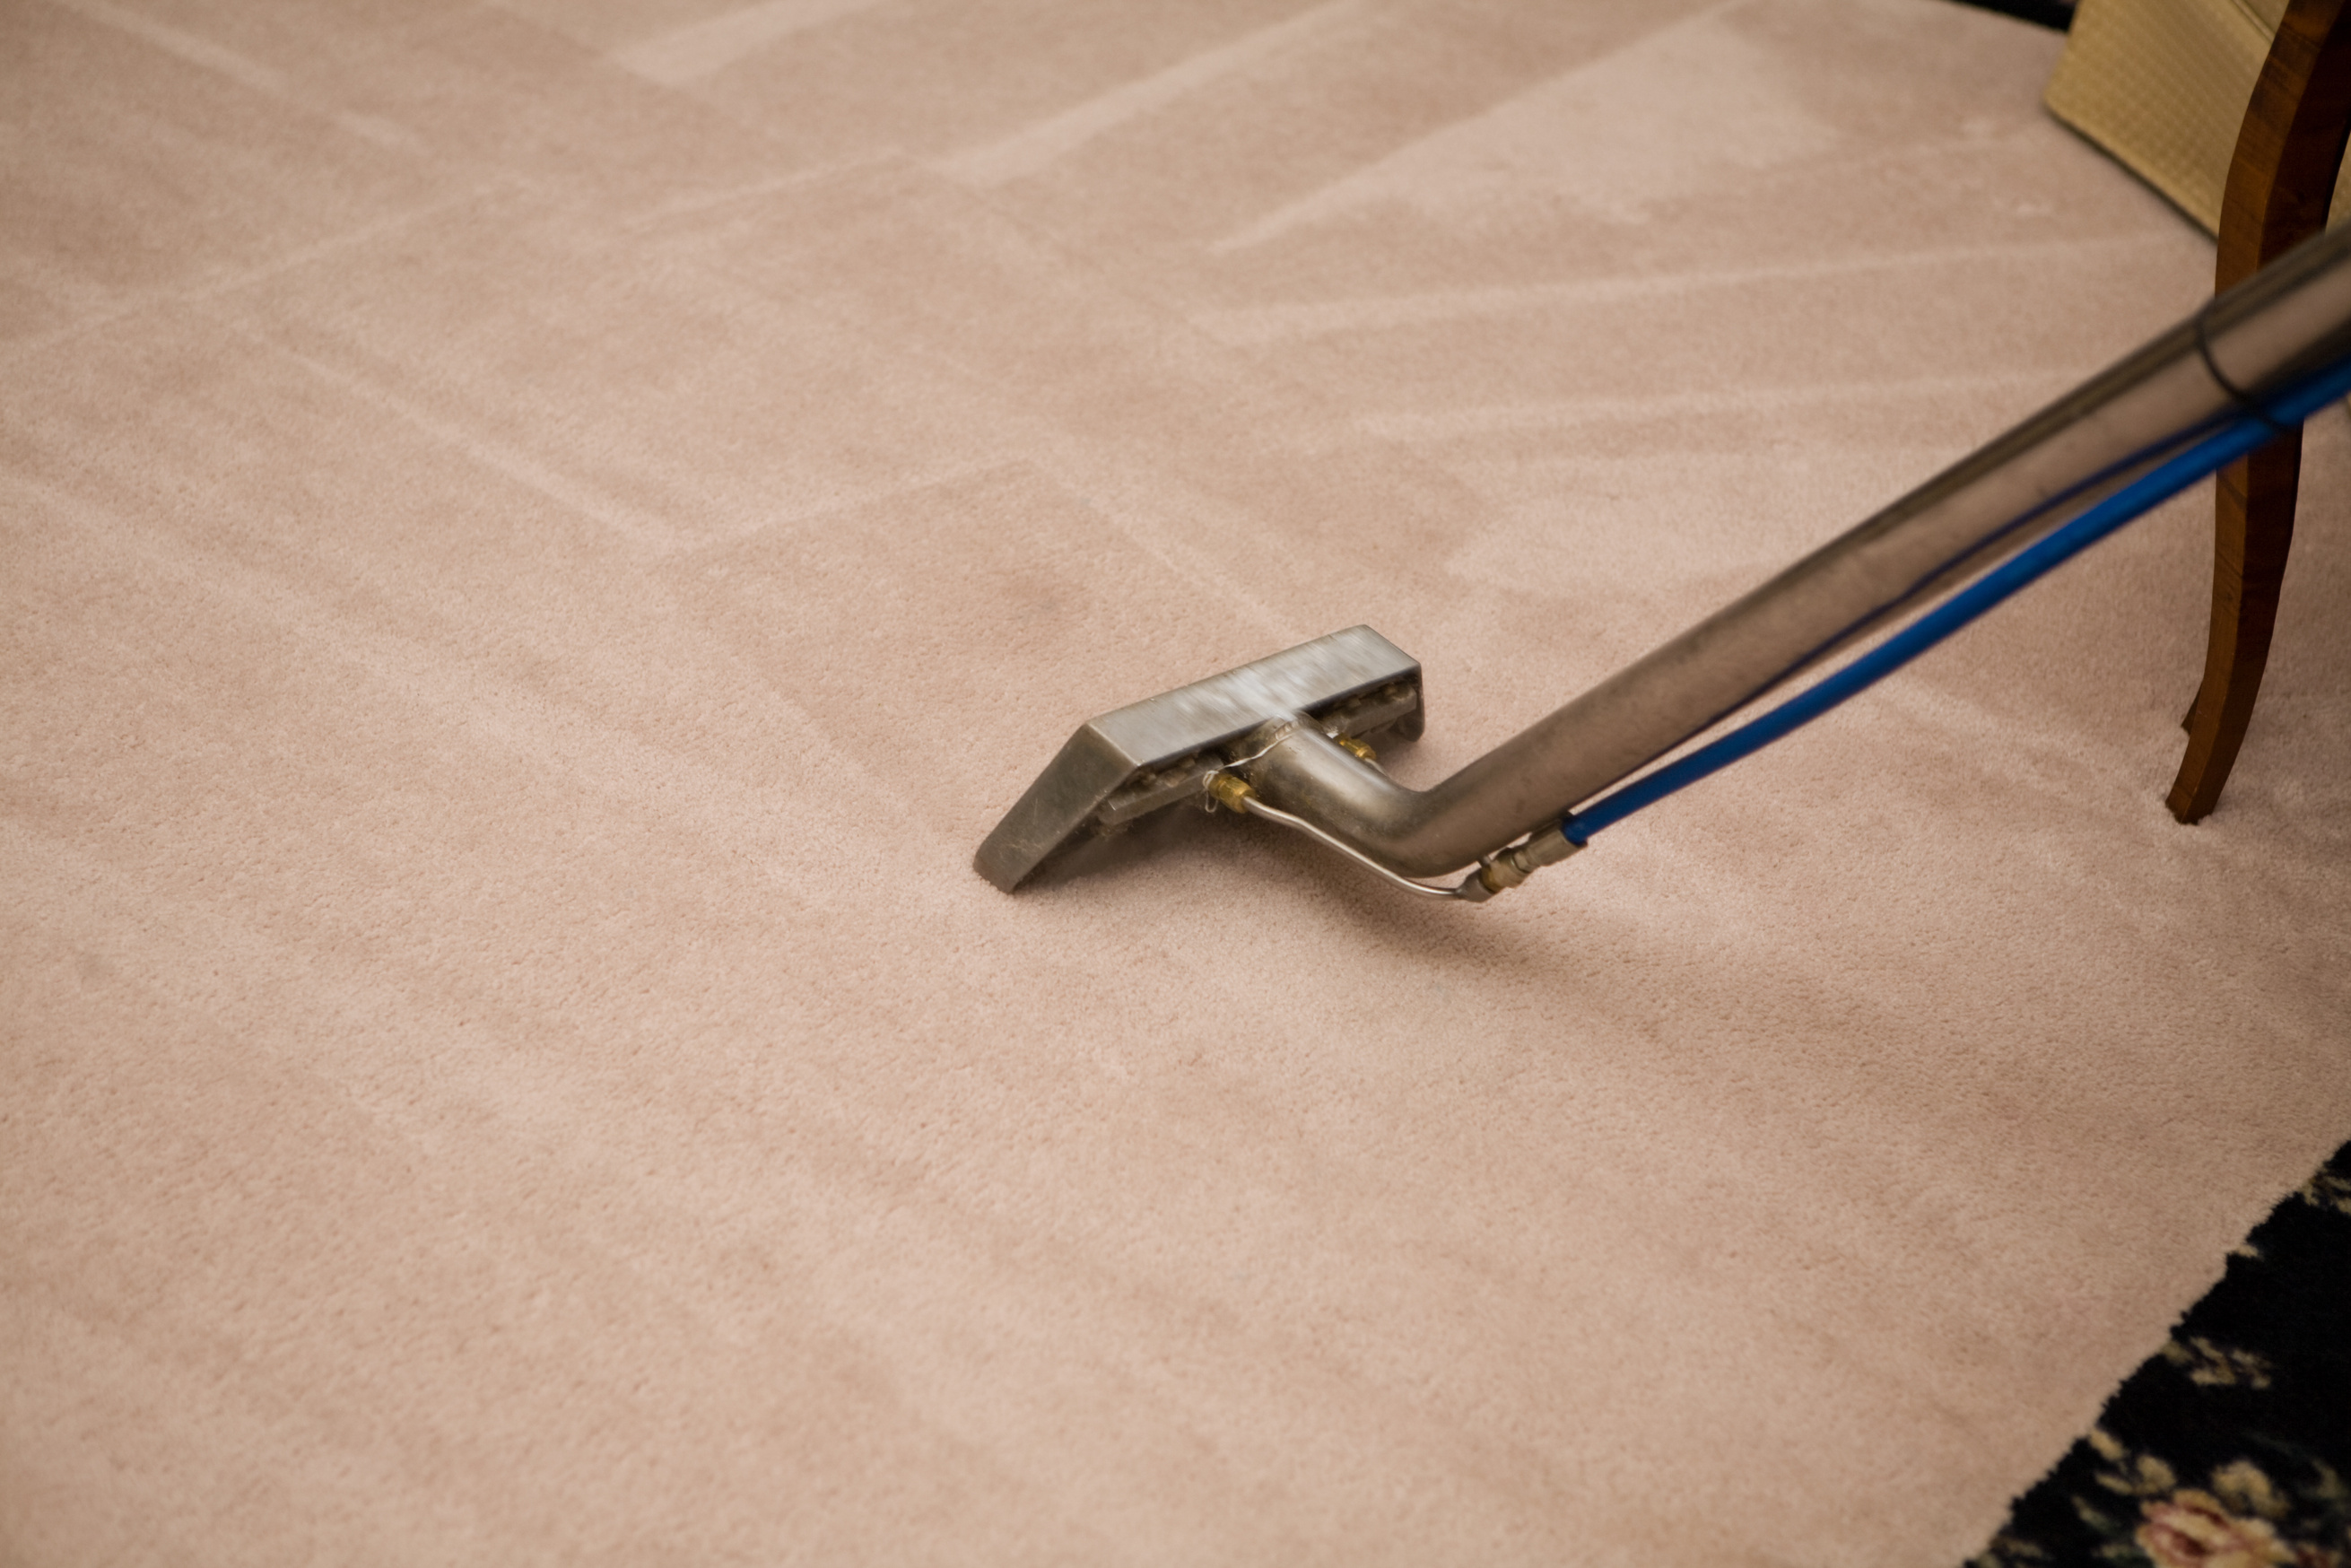 Steam Carpet Cleaning Process